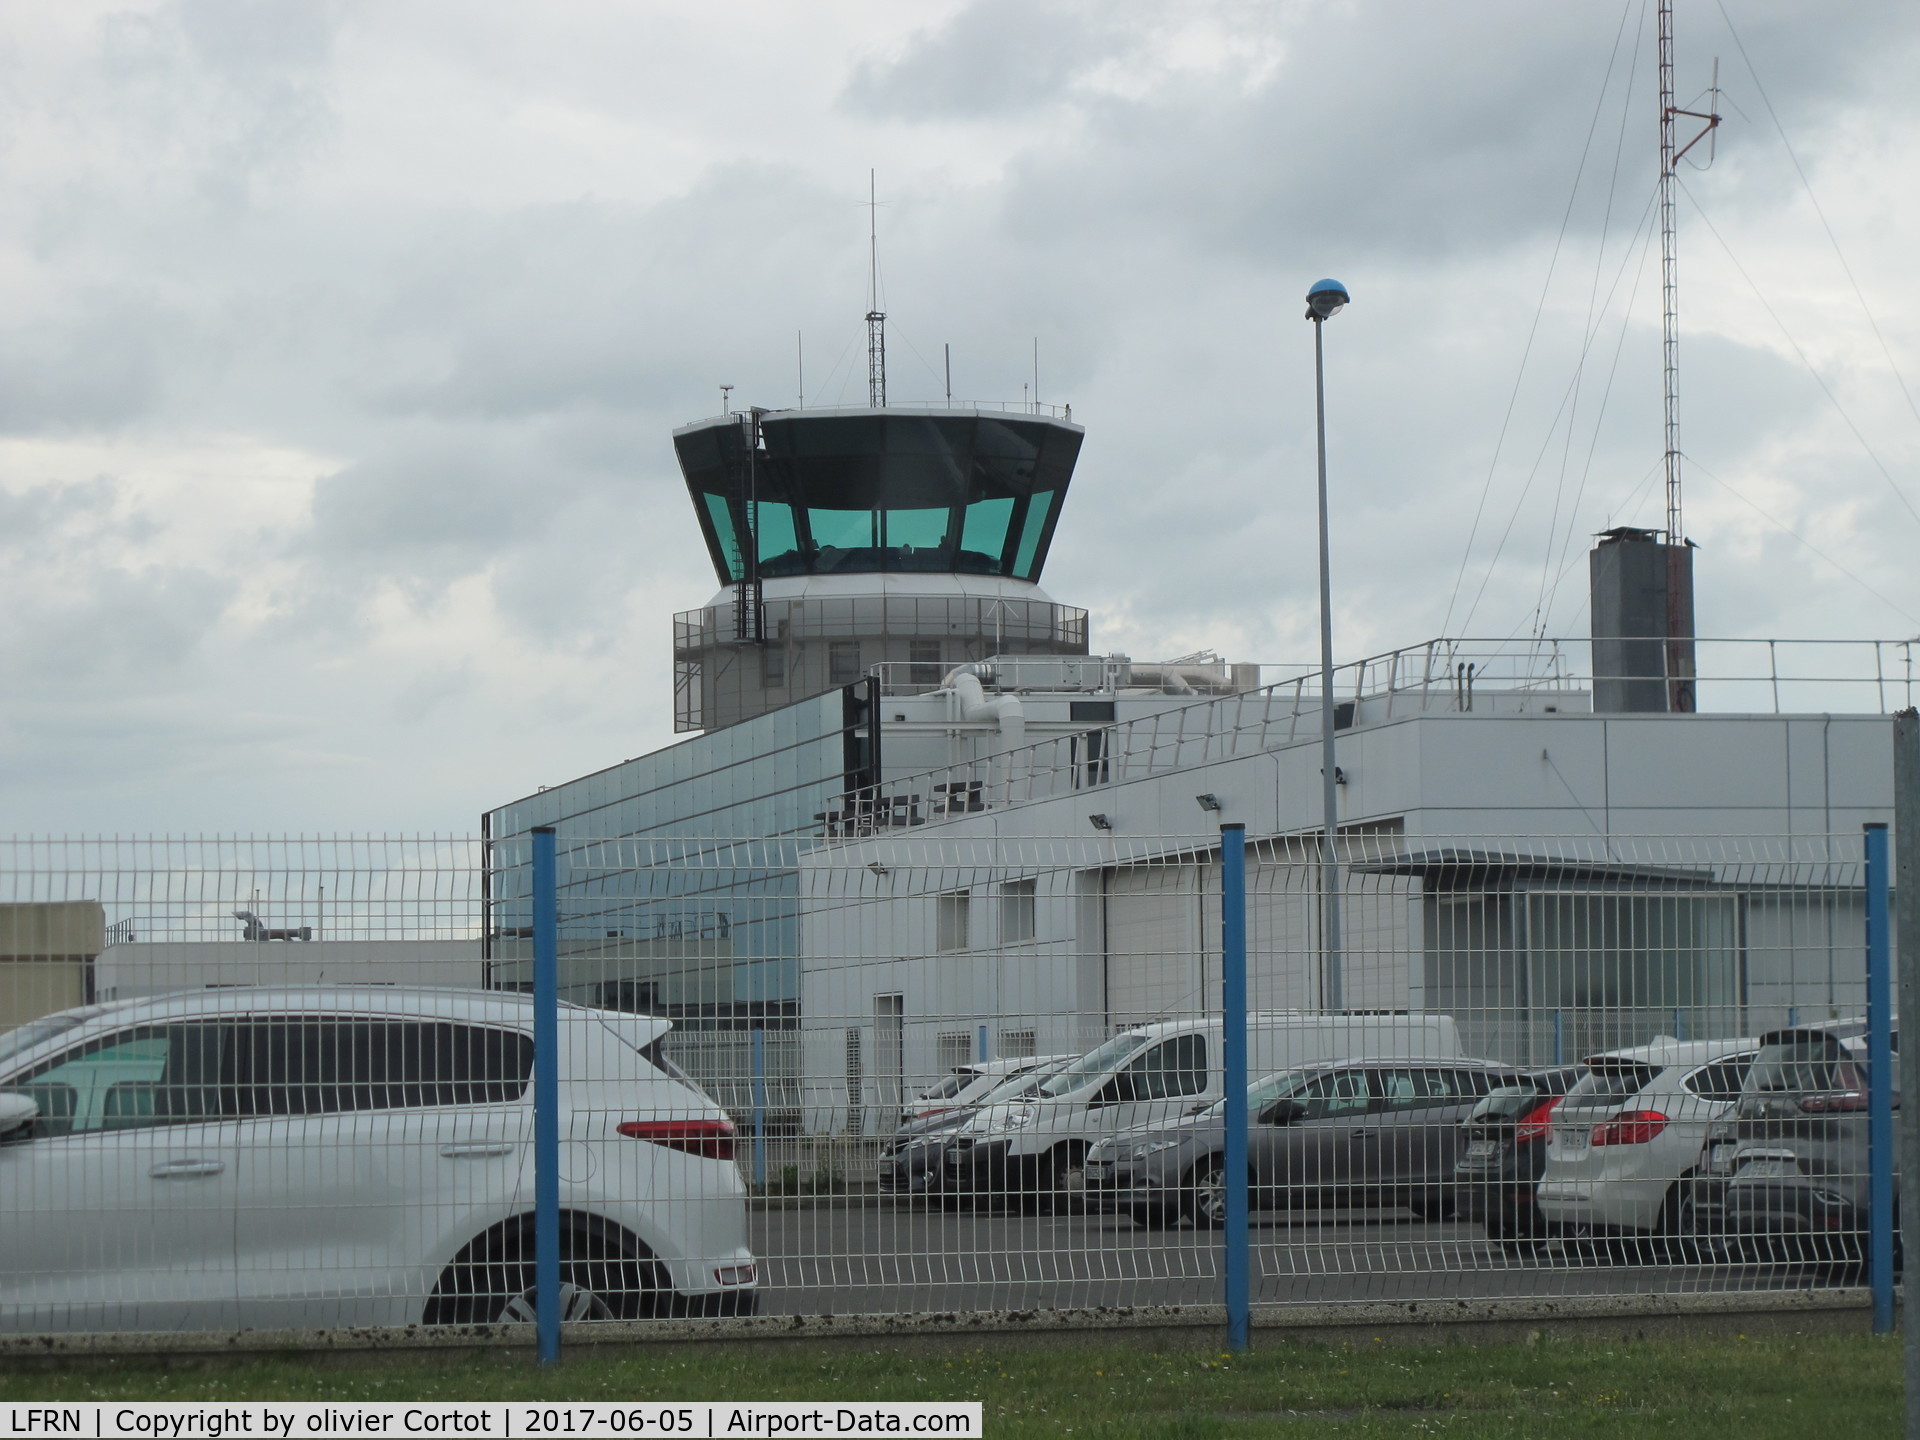 Rennes Airport, Saint-Jacques Airport France (LFRN) - the control tower